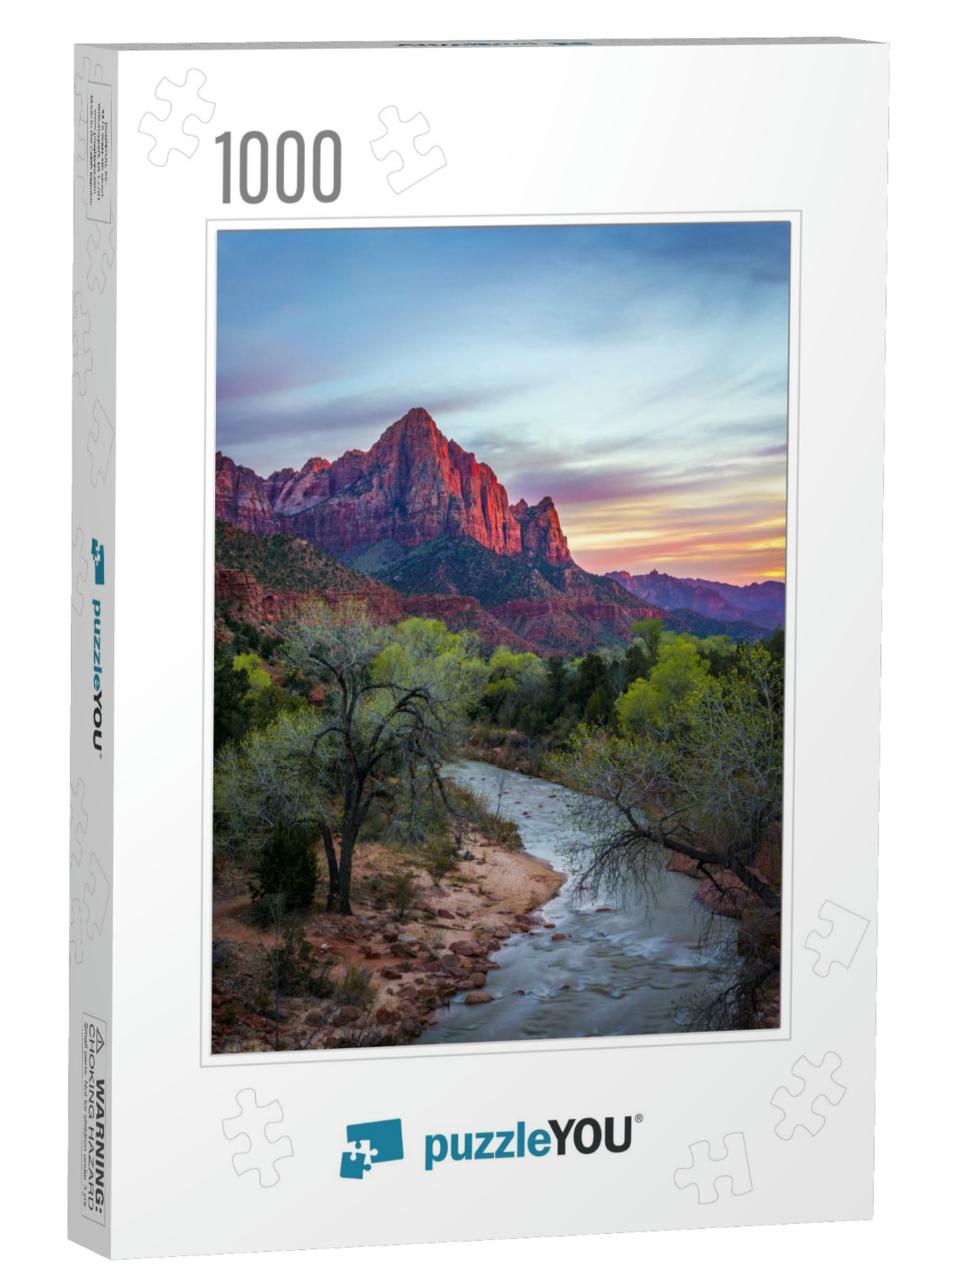 Zion Watchman & Virgin River At Sunset, Zion National Par... Jigsaw Puzzle with 1000 pieces